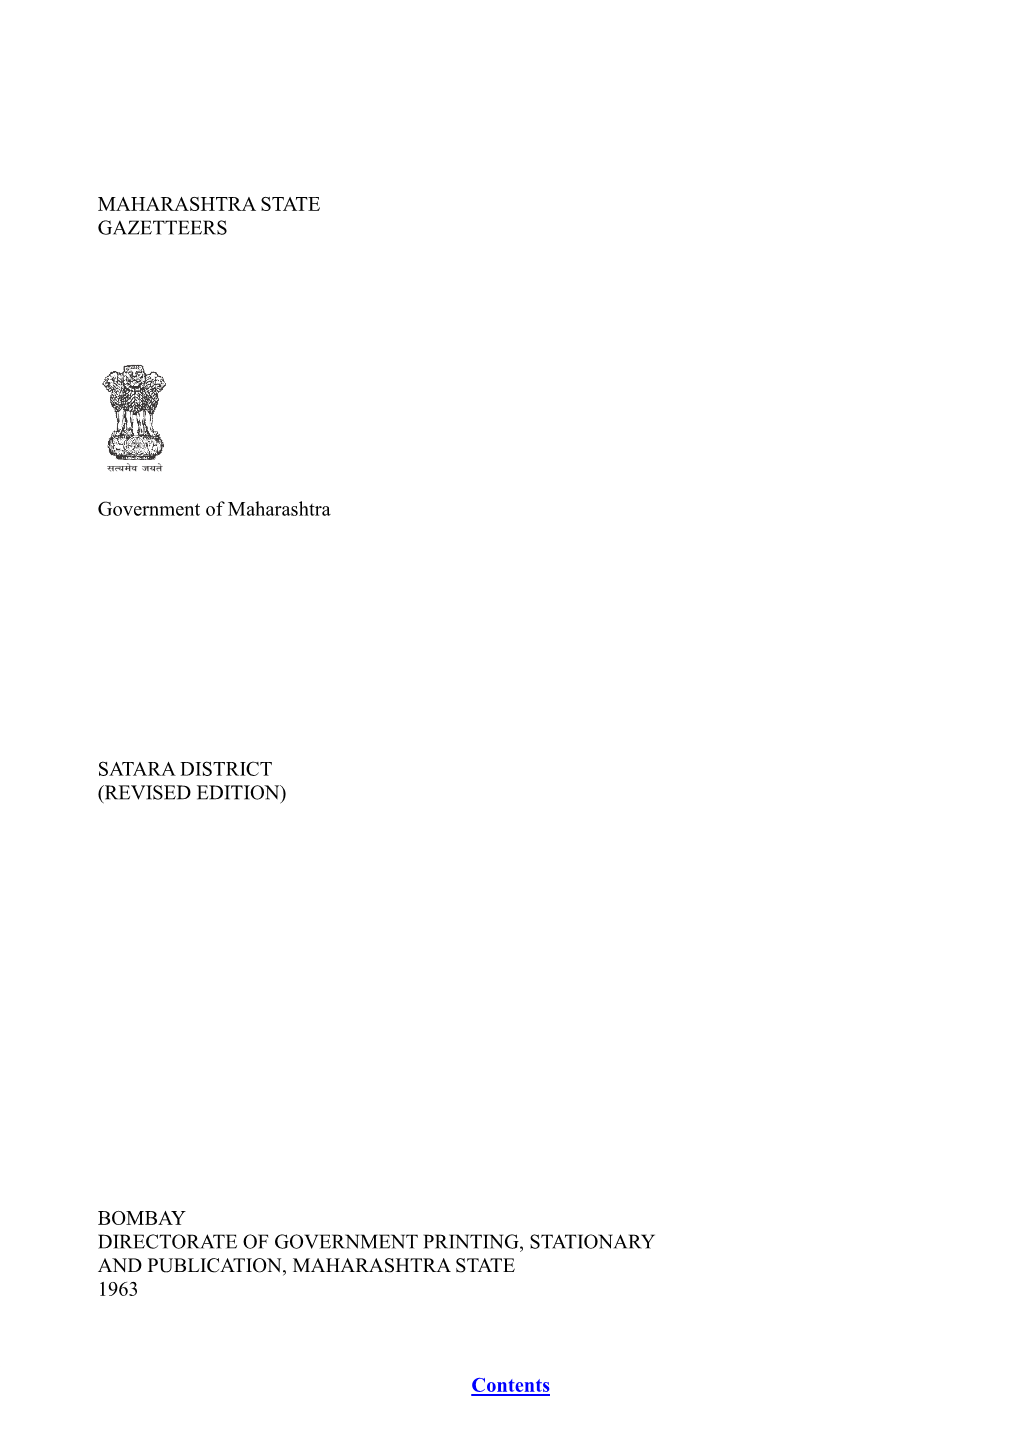 Contents MAHARASHTRA STATE GAZETTEERS Government Of